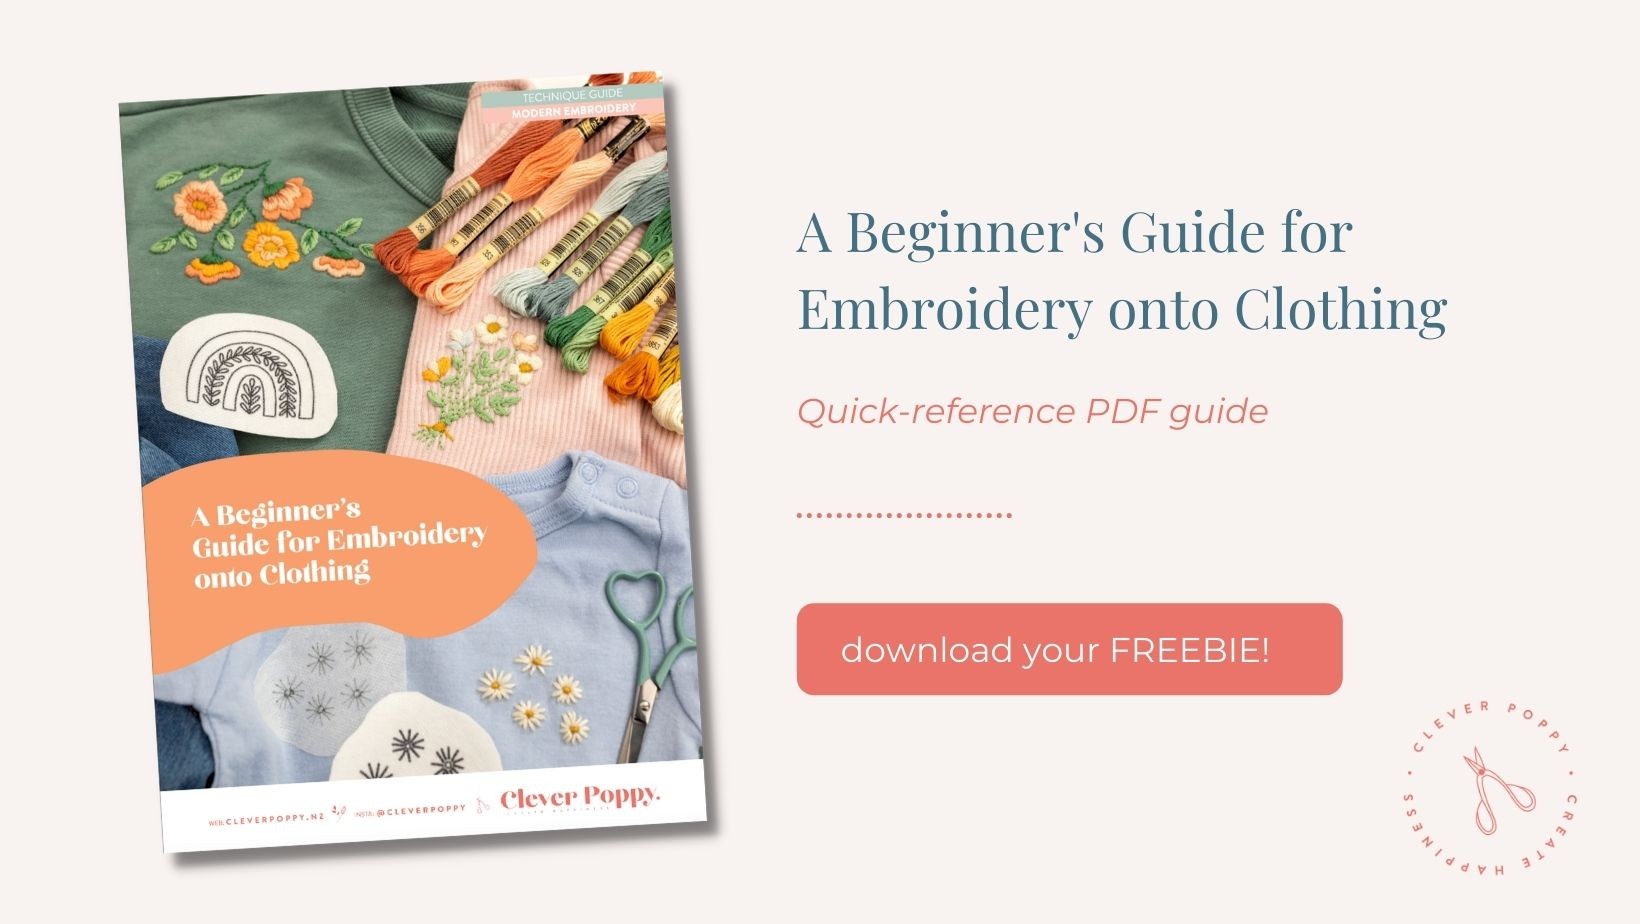 This is an image of the PDF, 'A Beginner's Guide for Embroidery onto Clothing.'